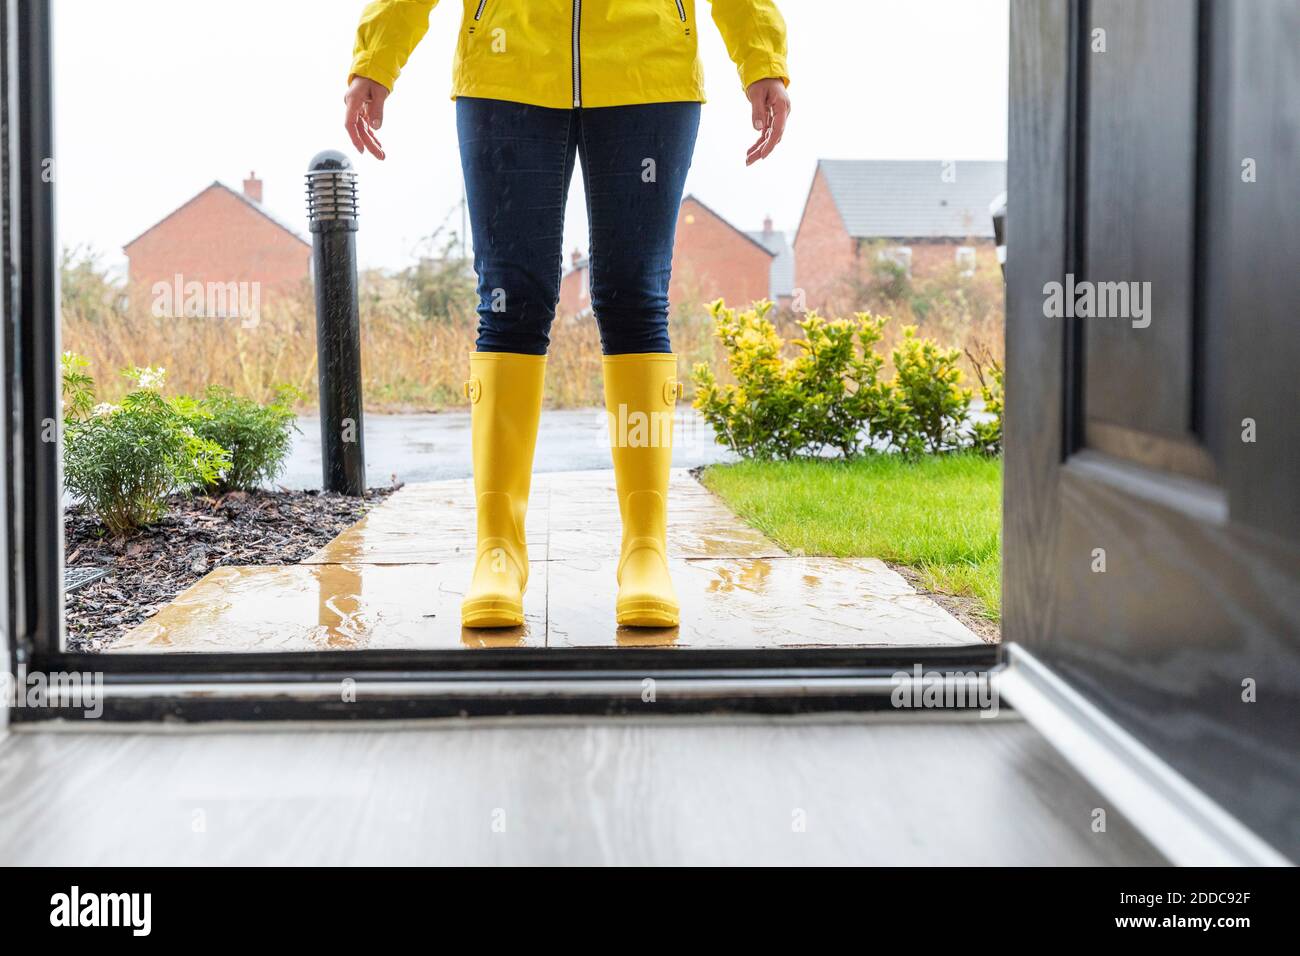 Legs of woman wearing rubber boot standing in back yard Stock Photo